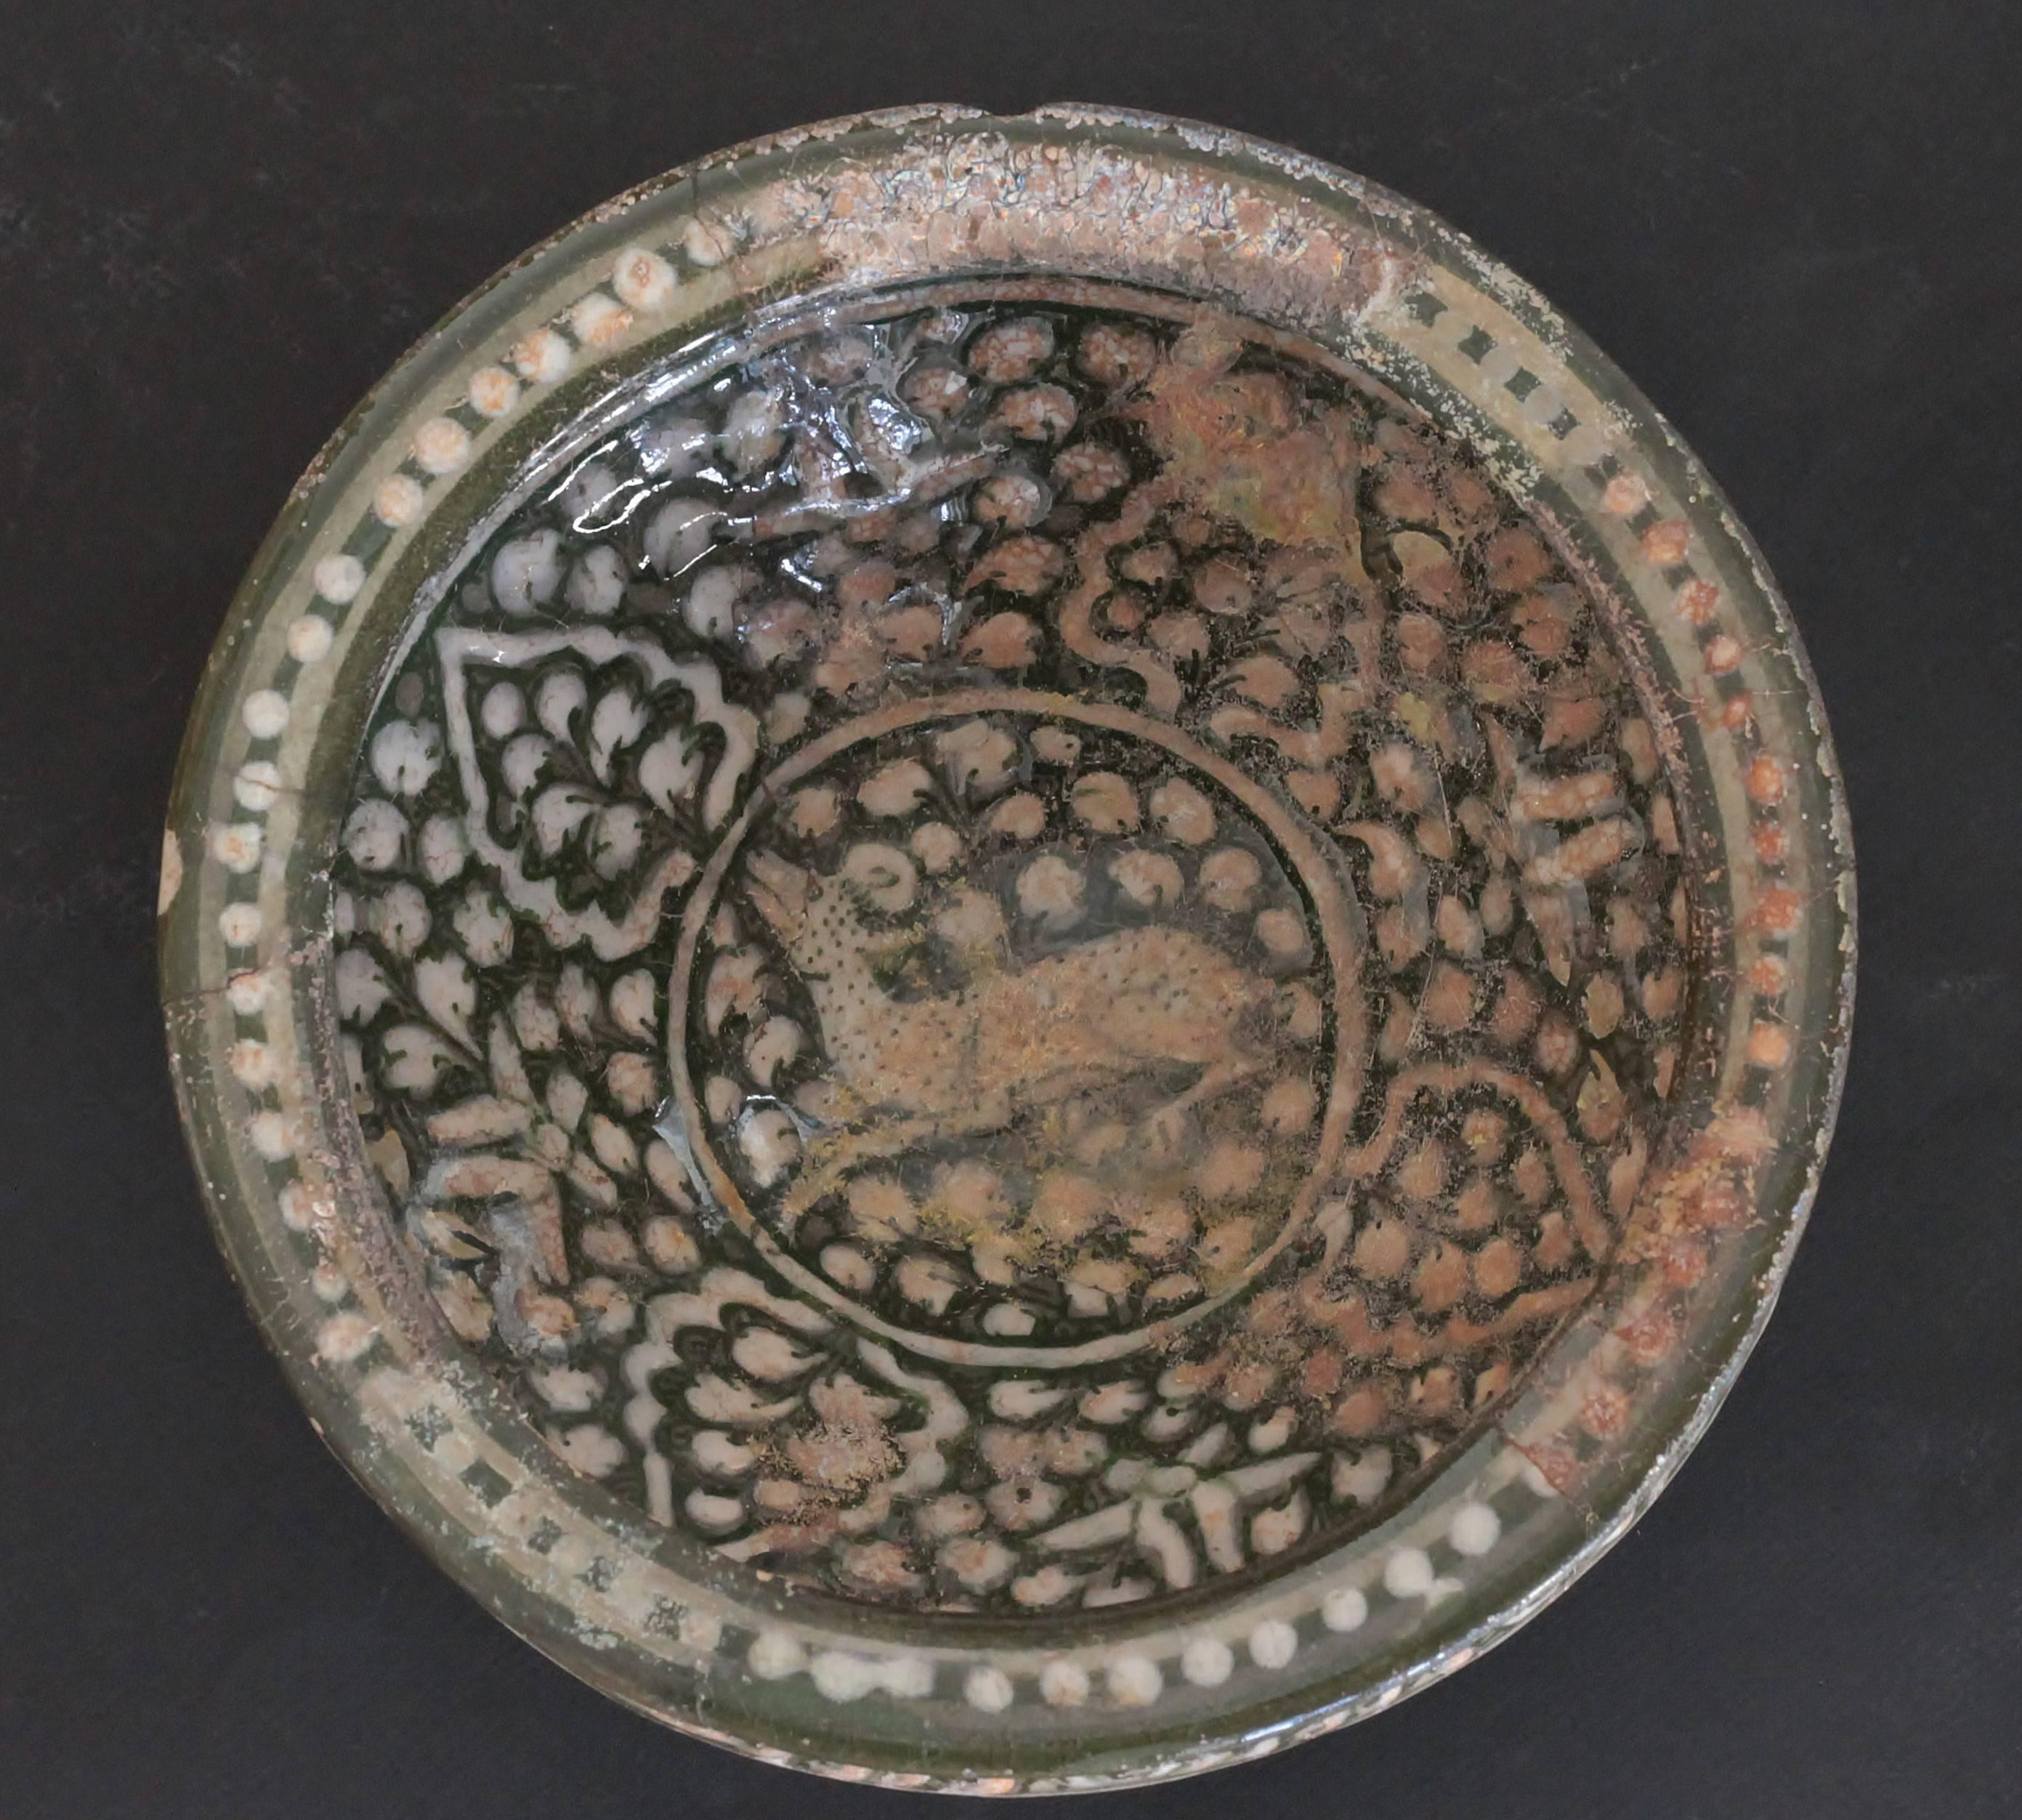 Bowl tronconique ceramic decorated in white on green bottom of one goat in the centre of sheet, flowers and pearls. So called inscription on the border.
Art Ilkhanide (1256-1353), Iran 12th and 13th centuries.
Measures: D. 22 cm. H. 11, 6 cm. Some